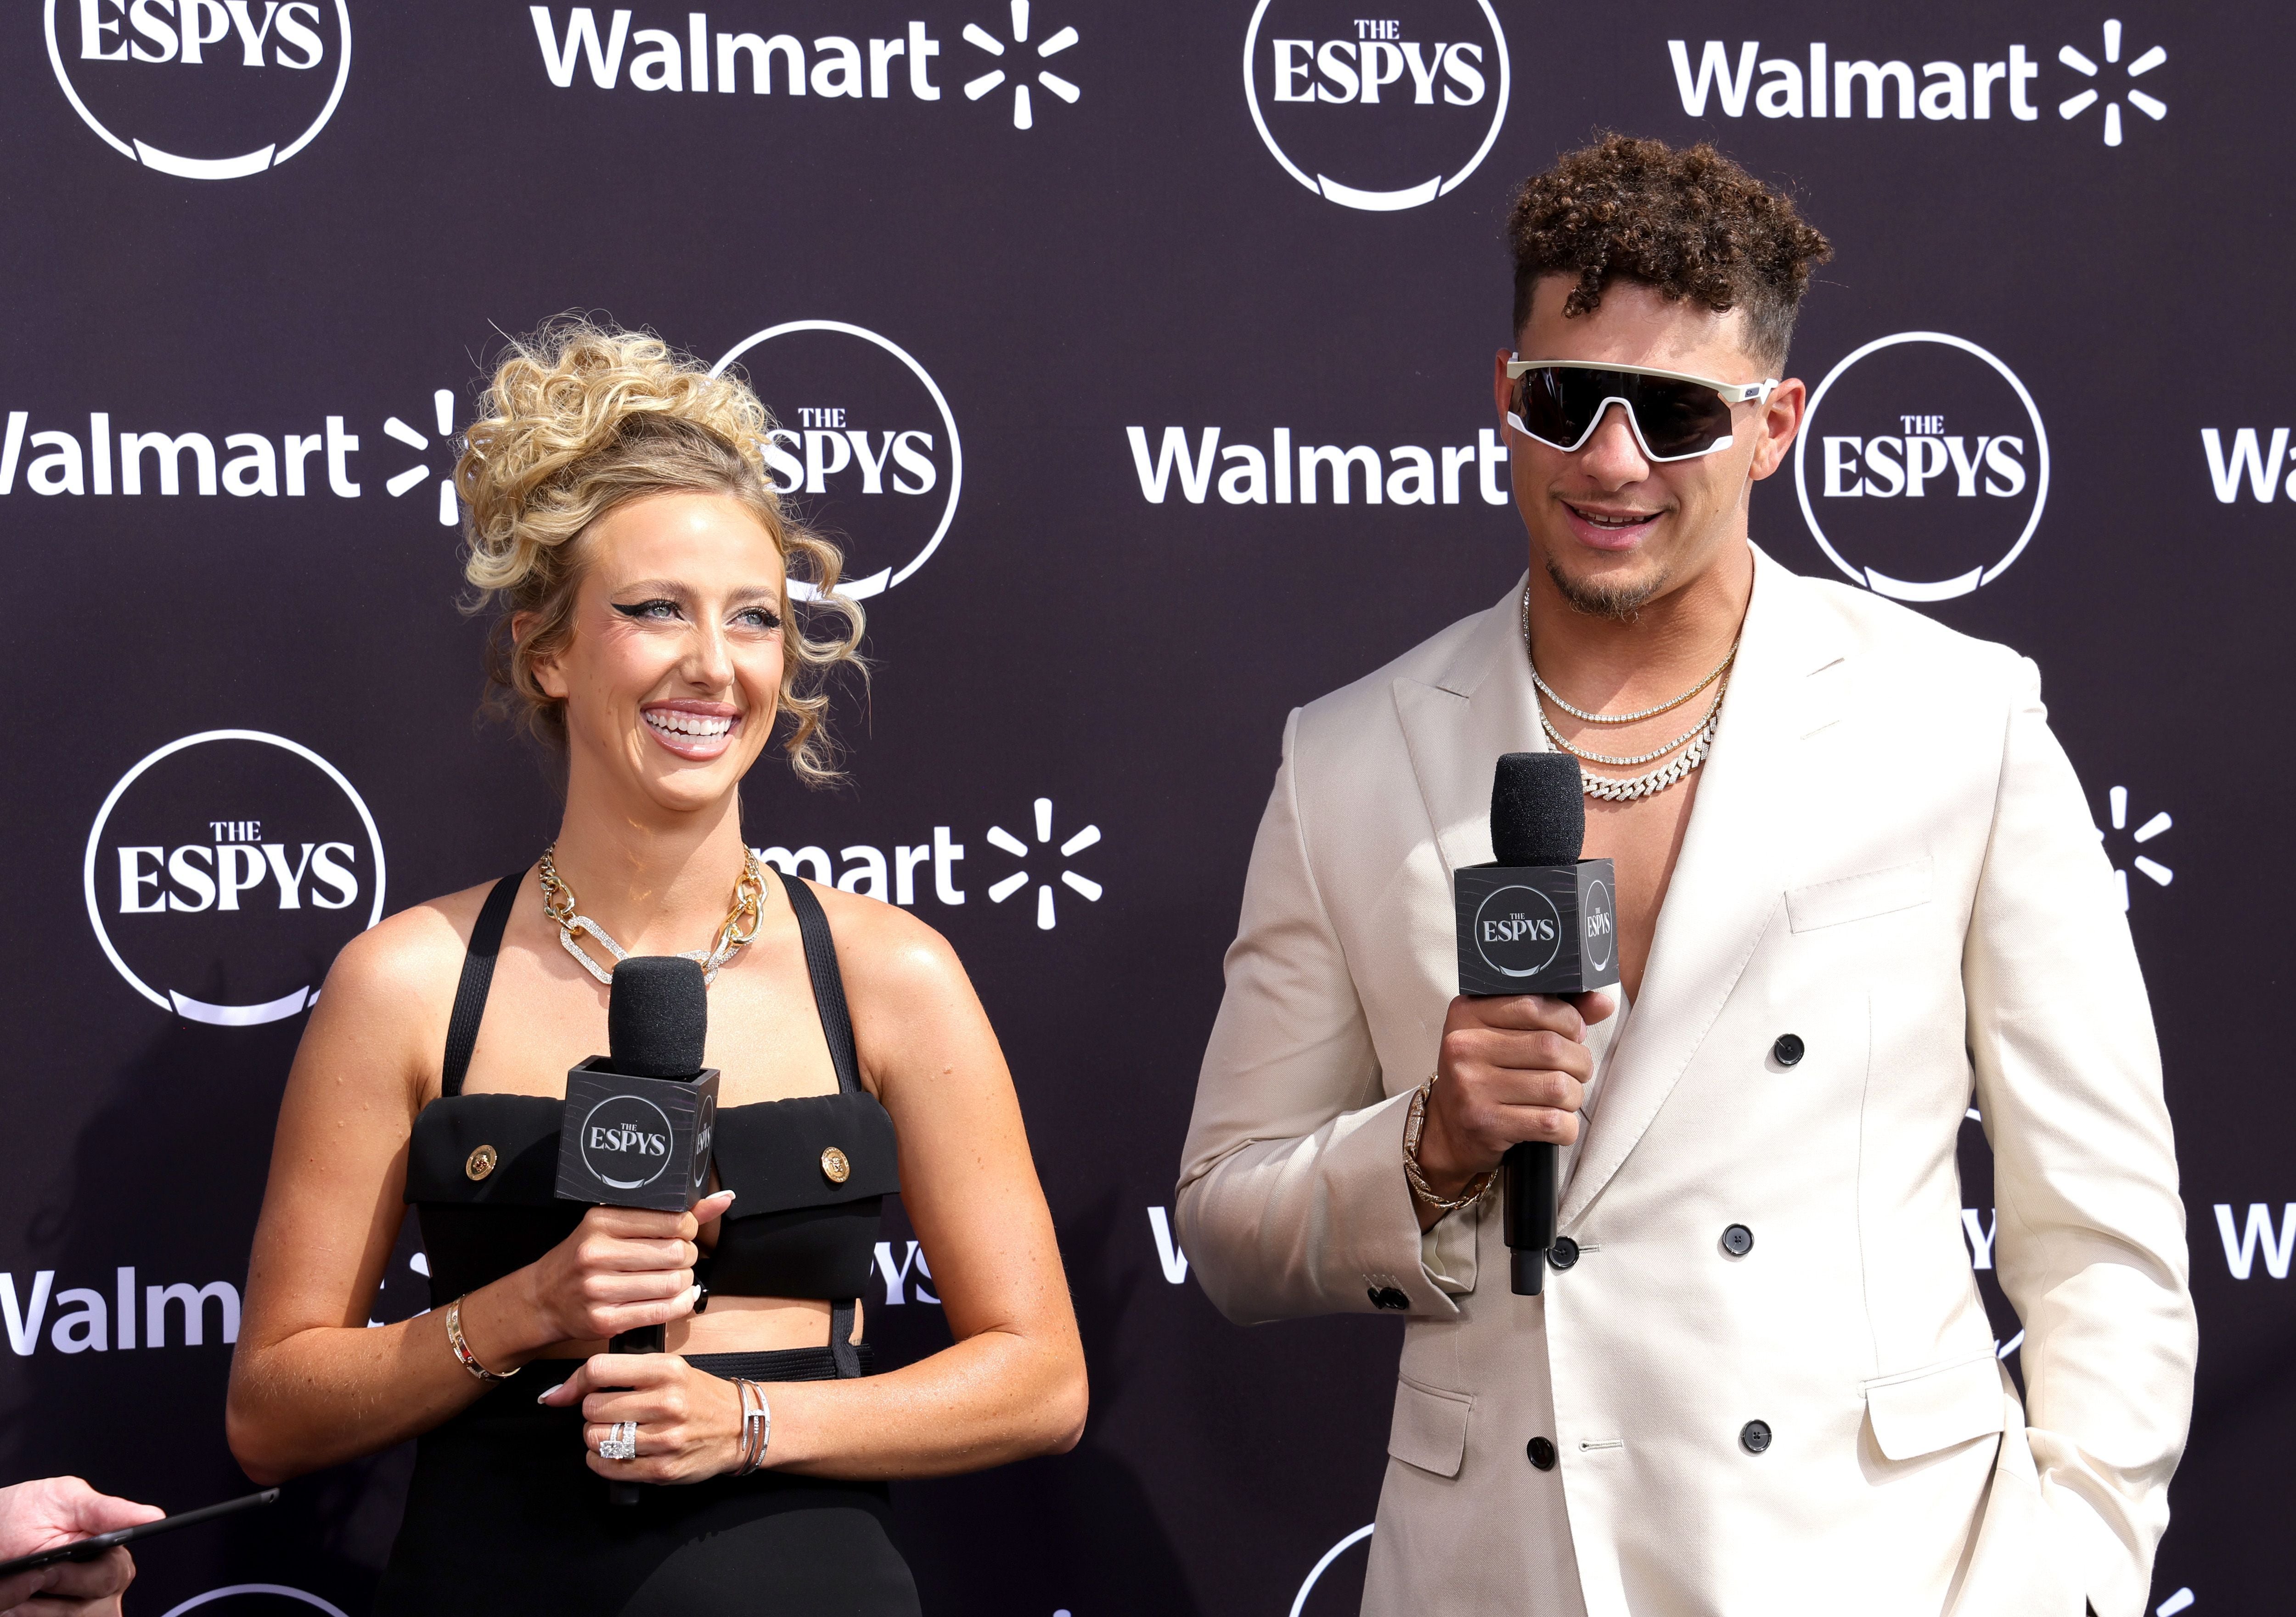 Patrick Mahomes and wife Brittany are a stylish pair at the Quarterback  premiere in Los Angeles